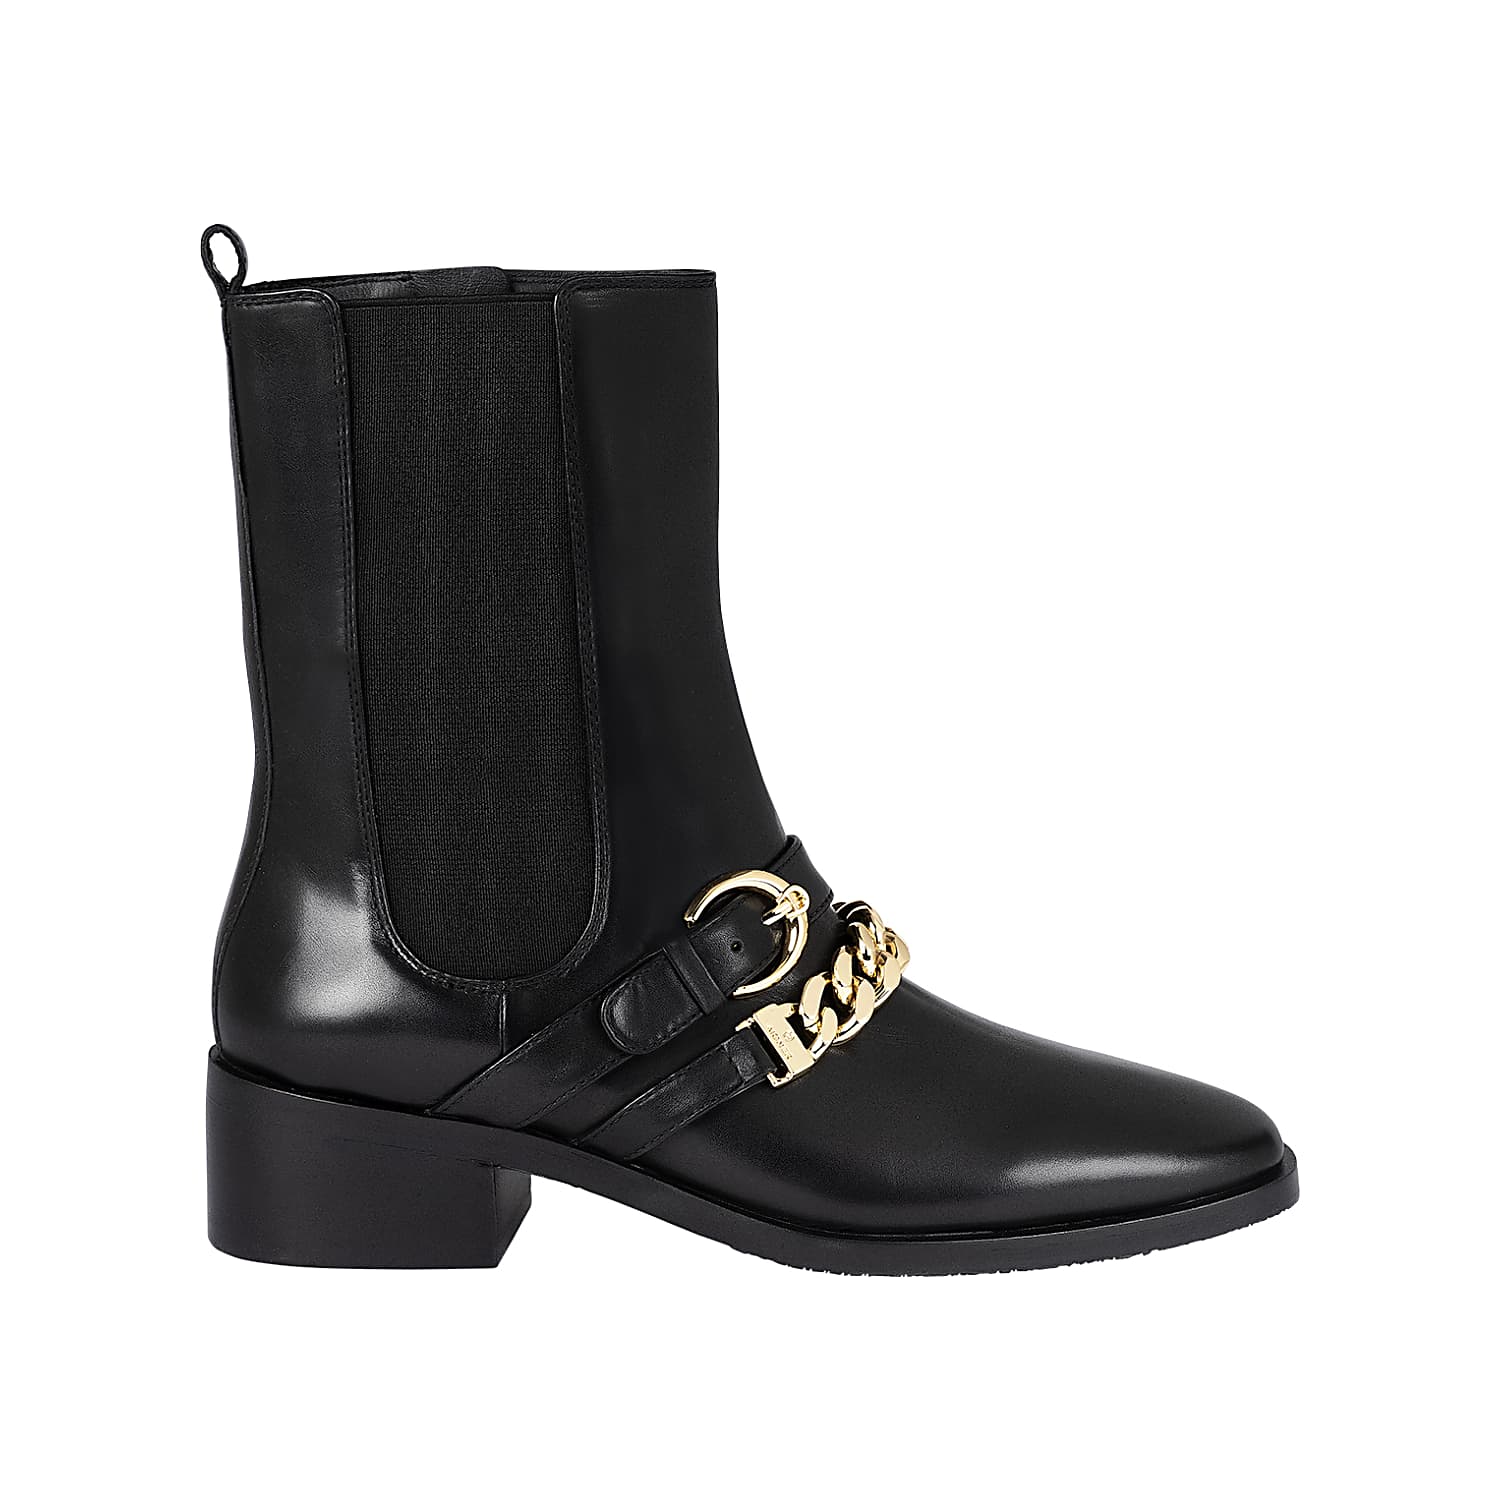 Camilla ankle boots with heel